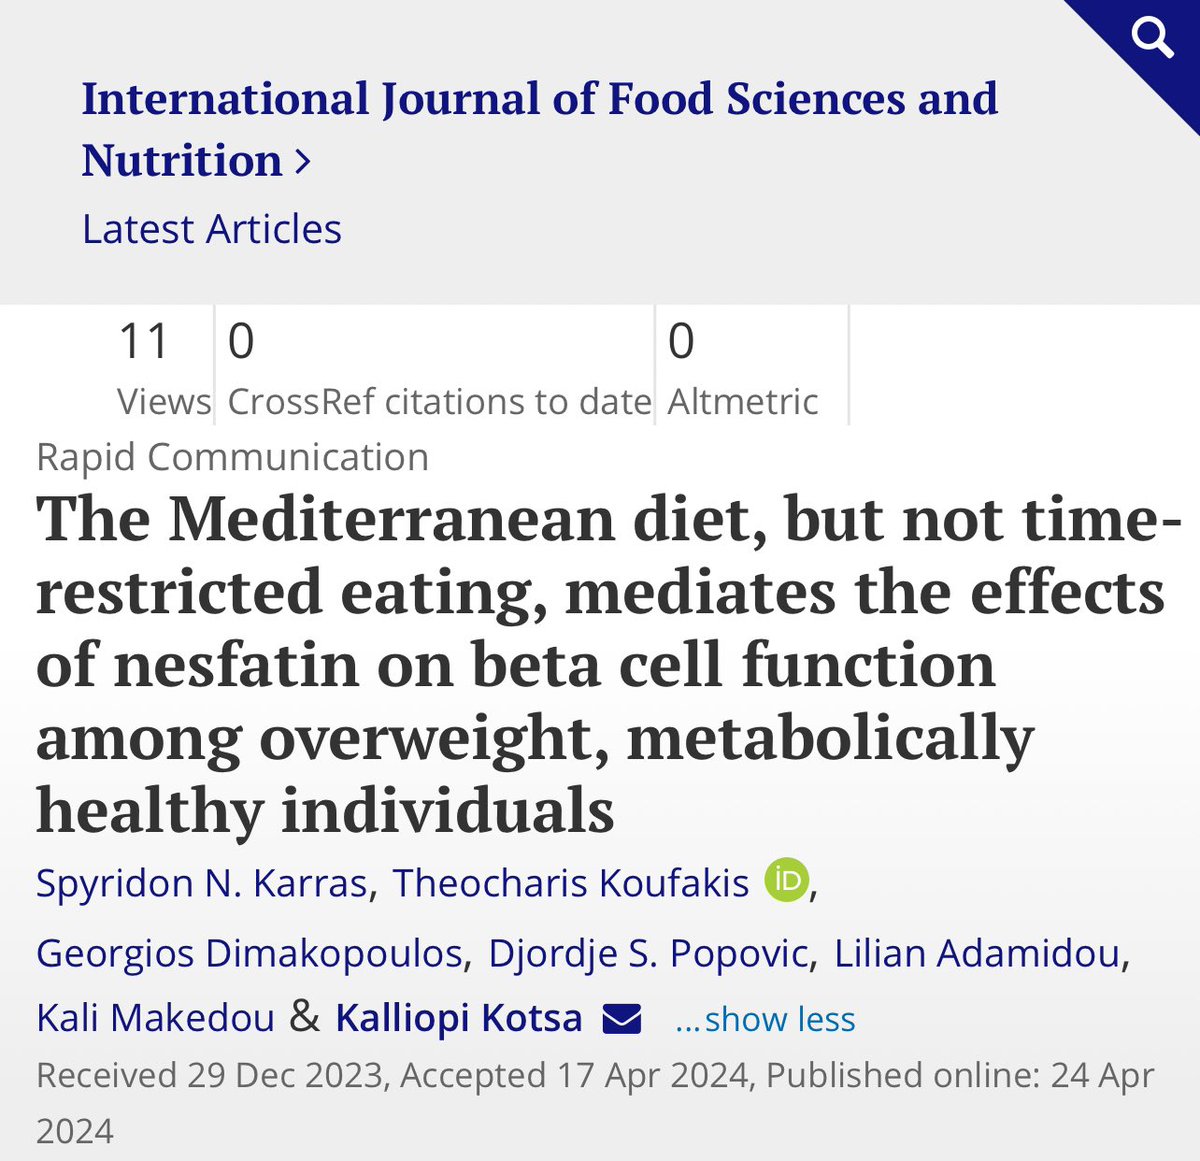 Happy to share our latest study which is the first in the literature showing that a #Mediterranean dietary pattern based on Orthodox fasting mediates the effects of nesfatin on beta cell function tandfonline.com/doi/full/10.10… @DjordjePopovi12